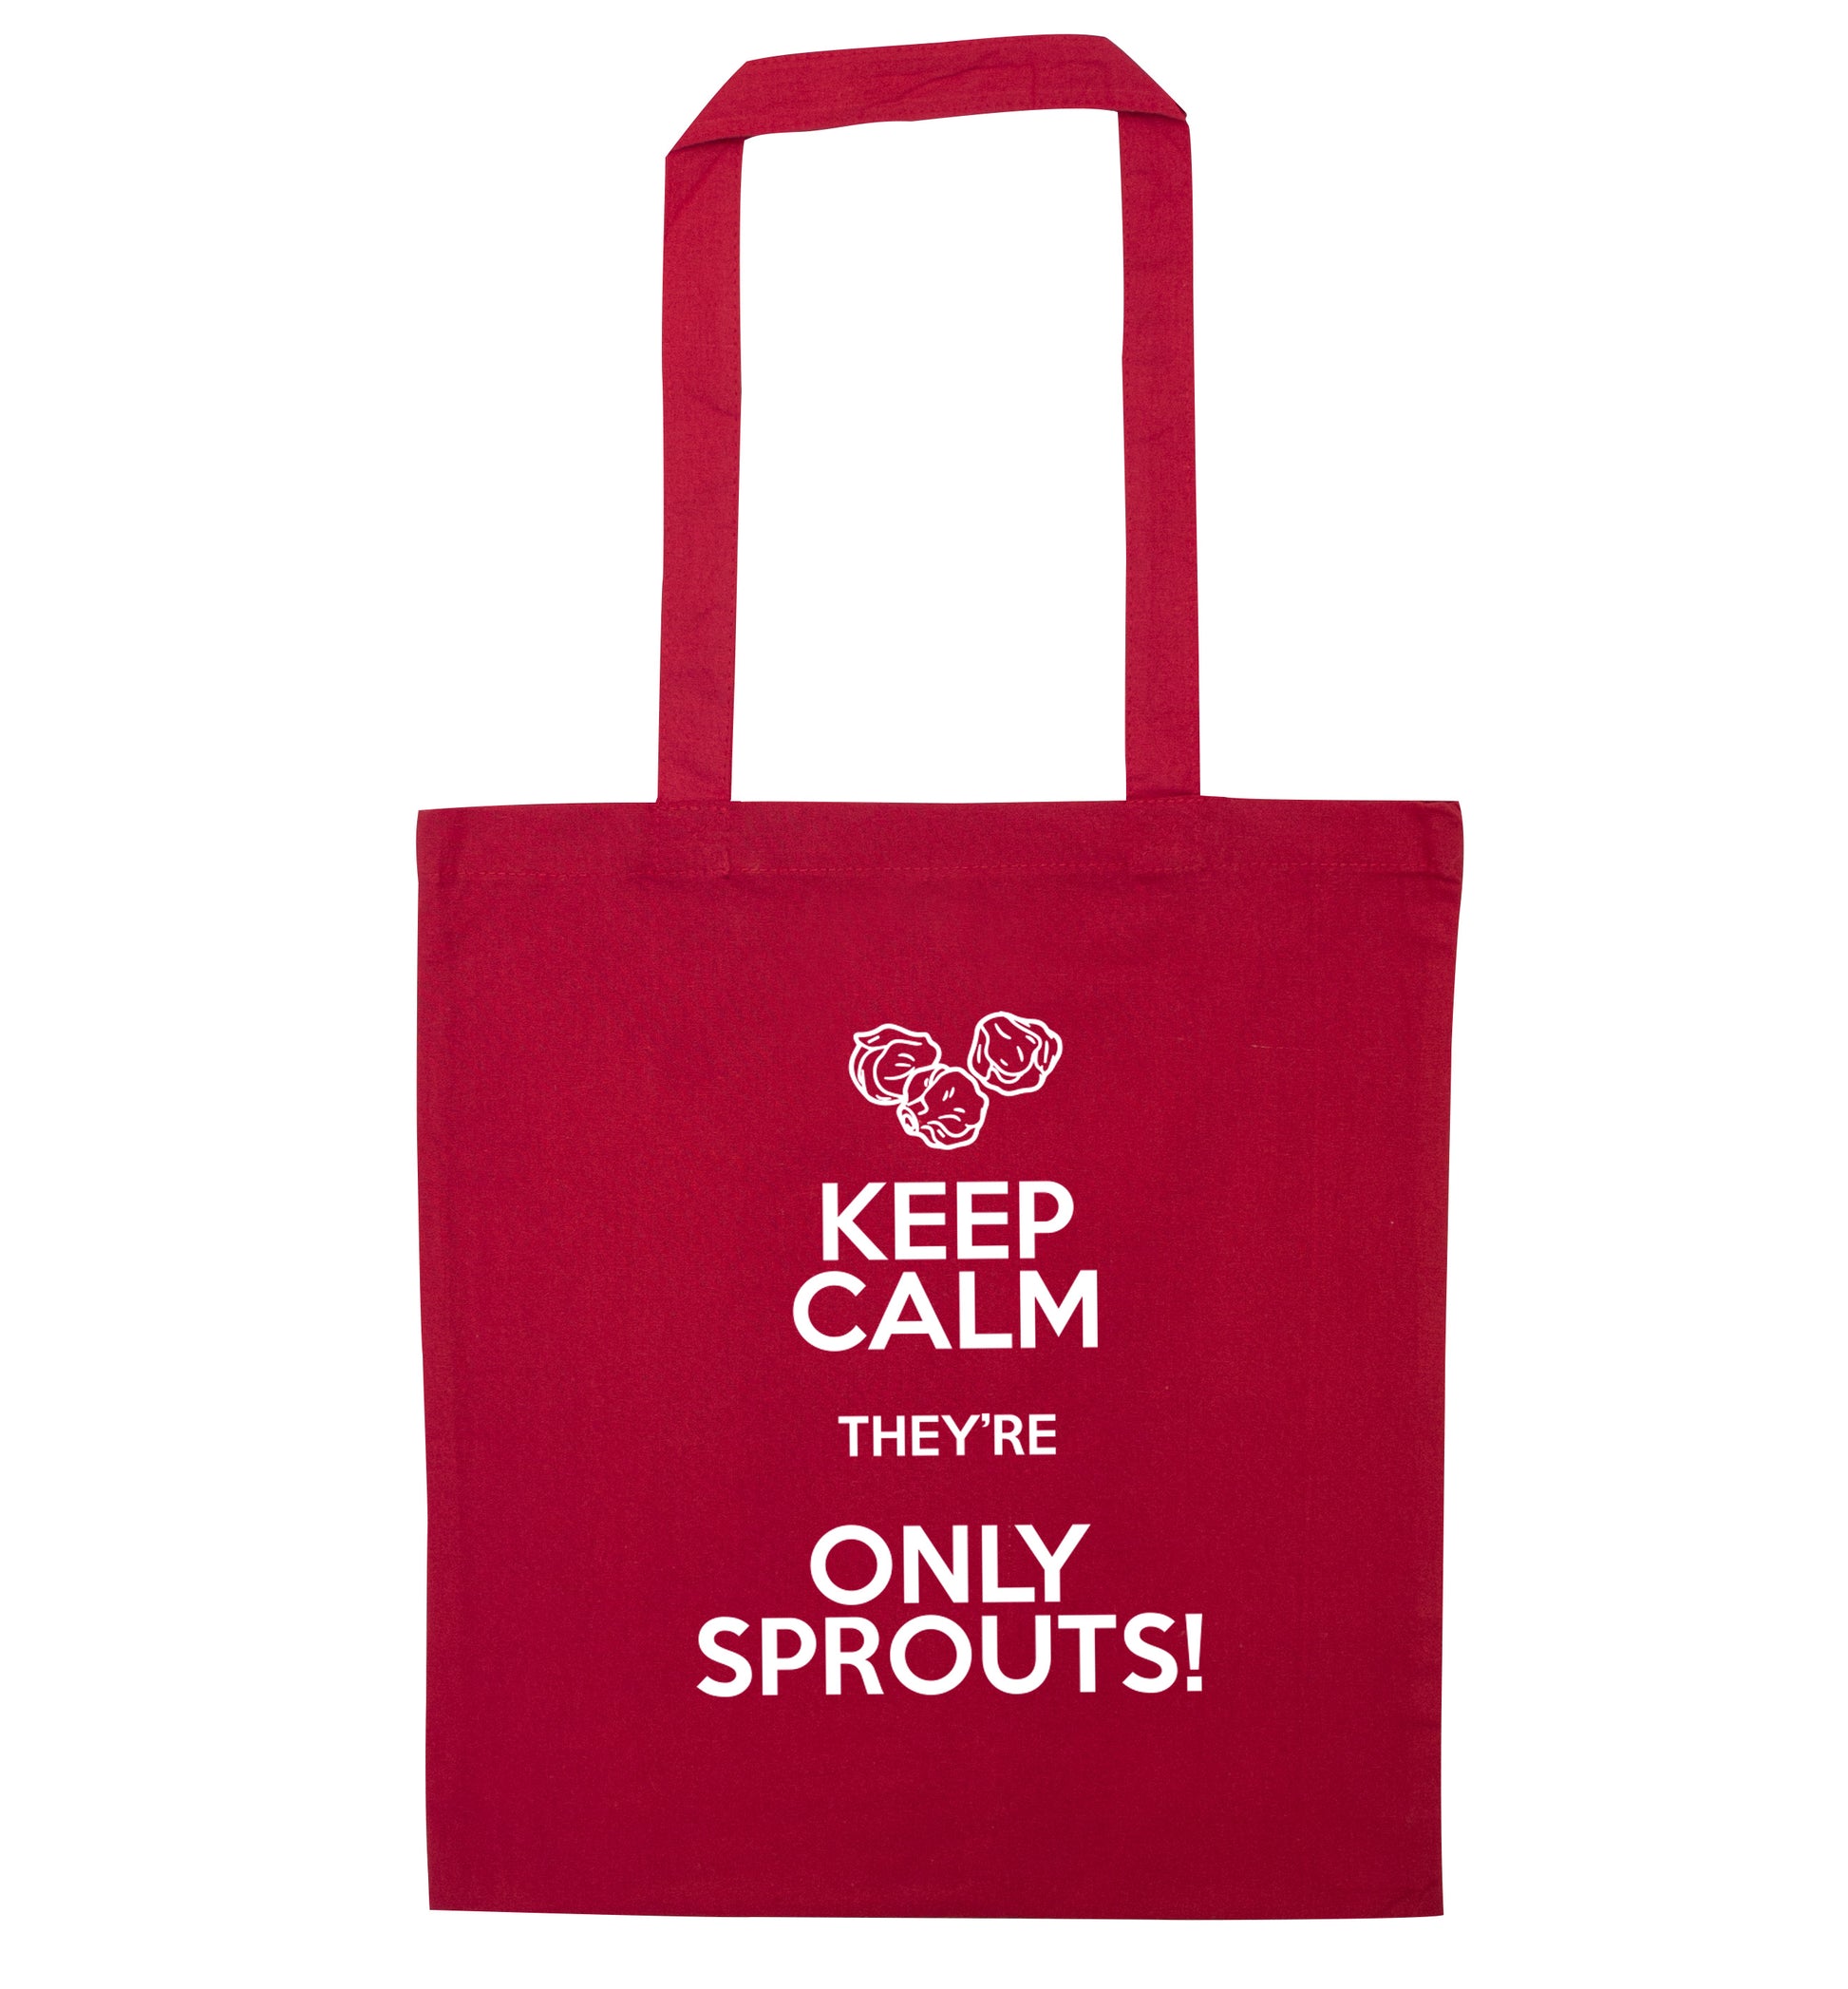 Keep calm they're only sprouts red tote bag